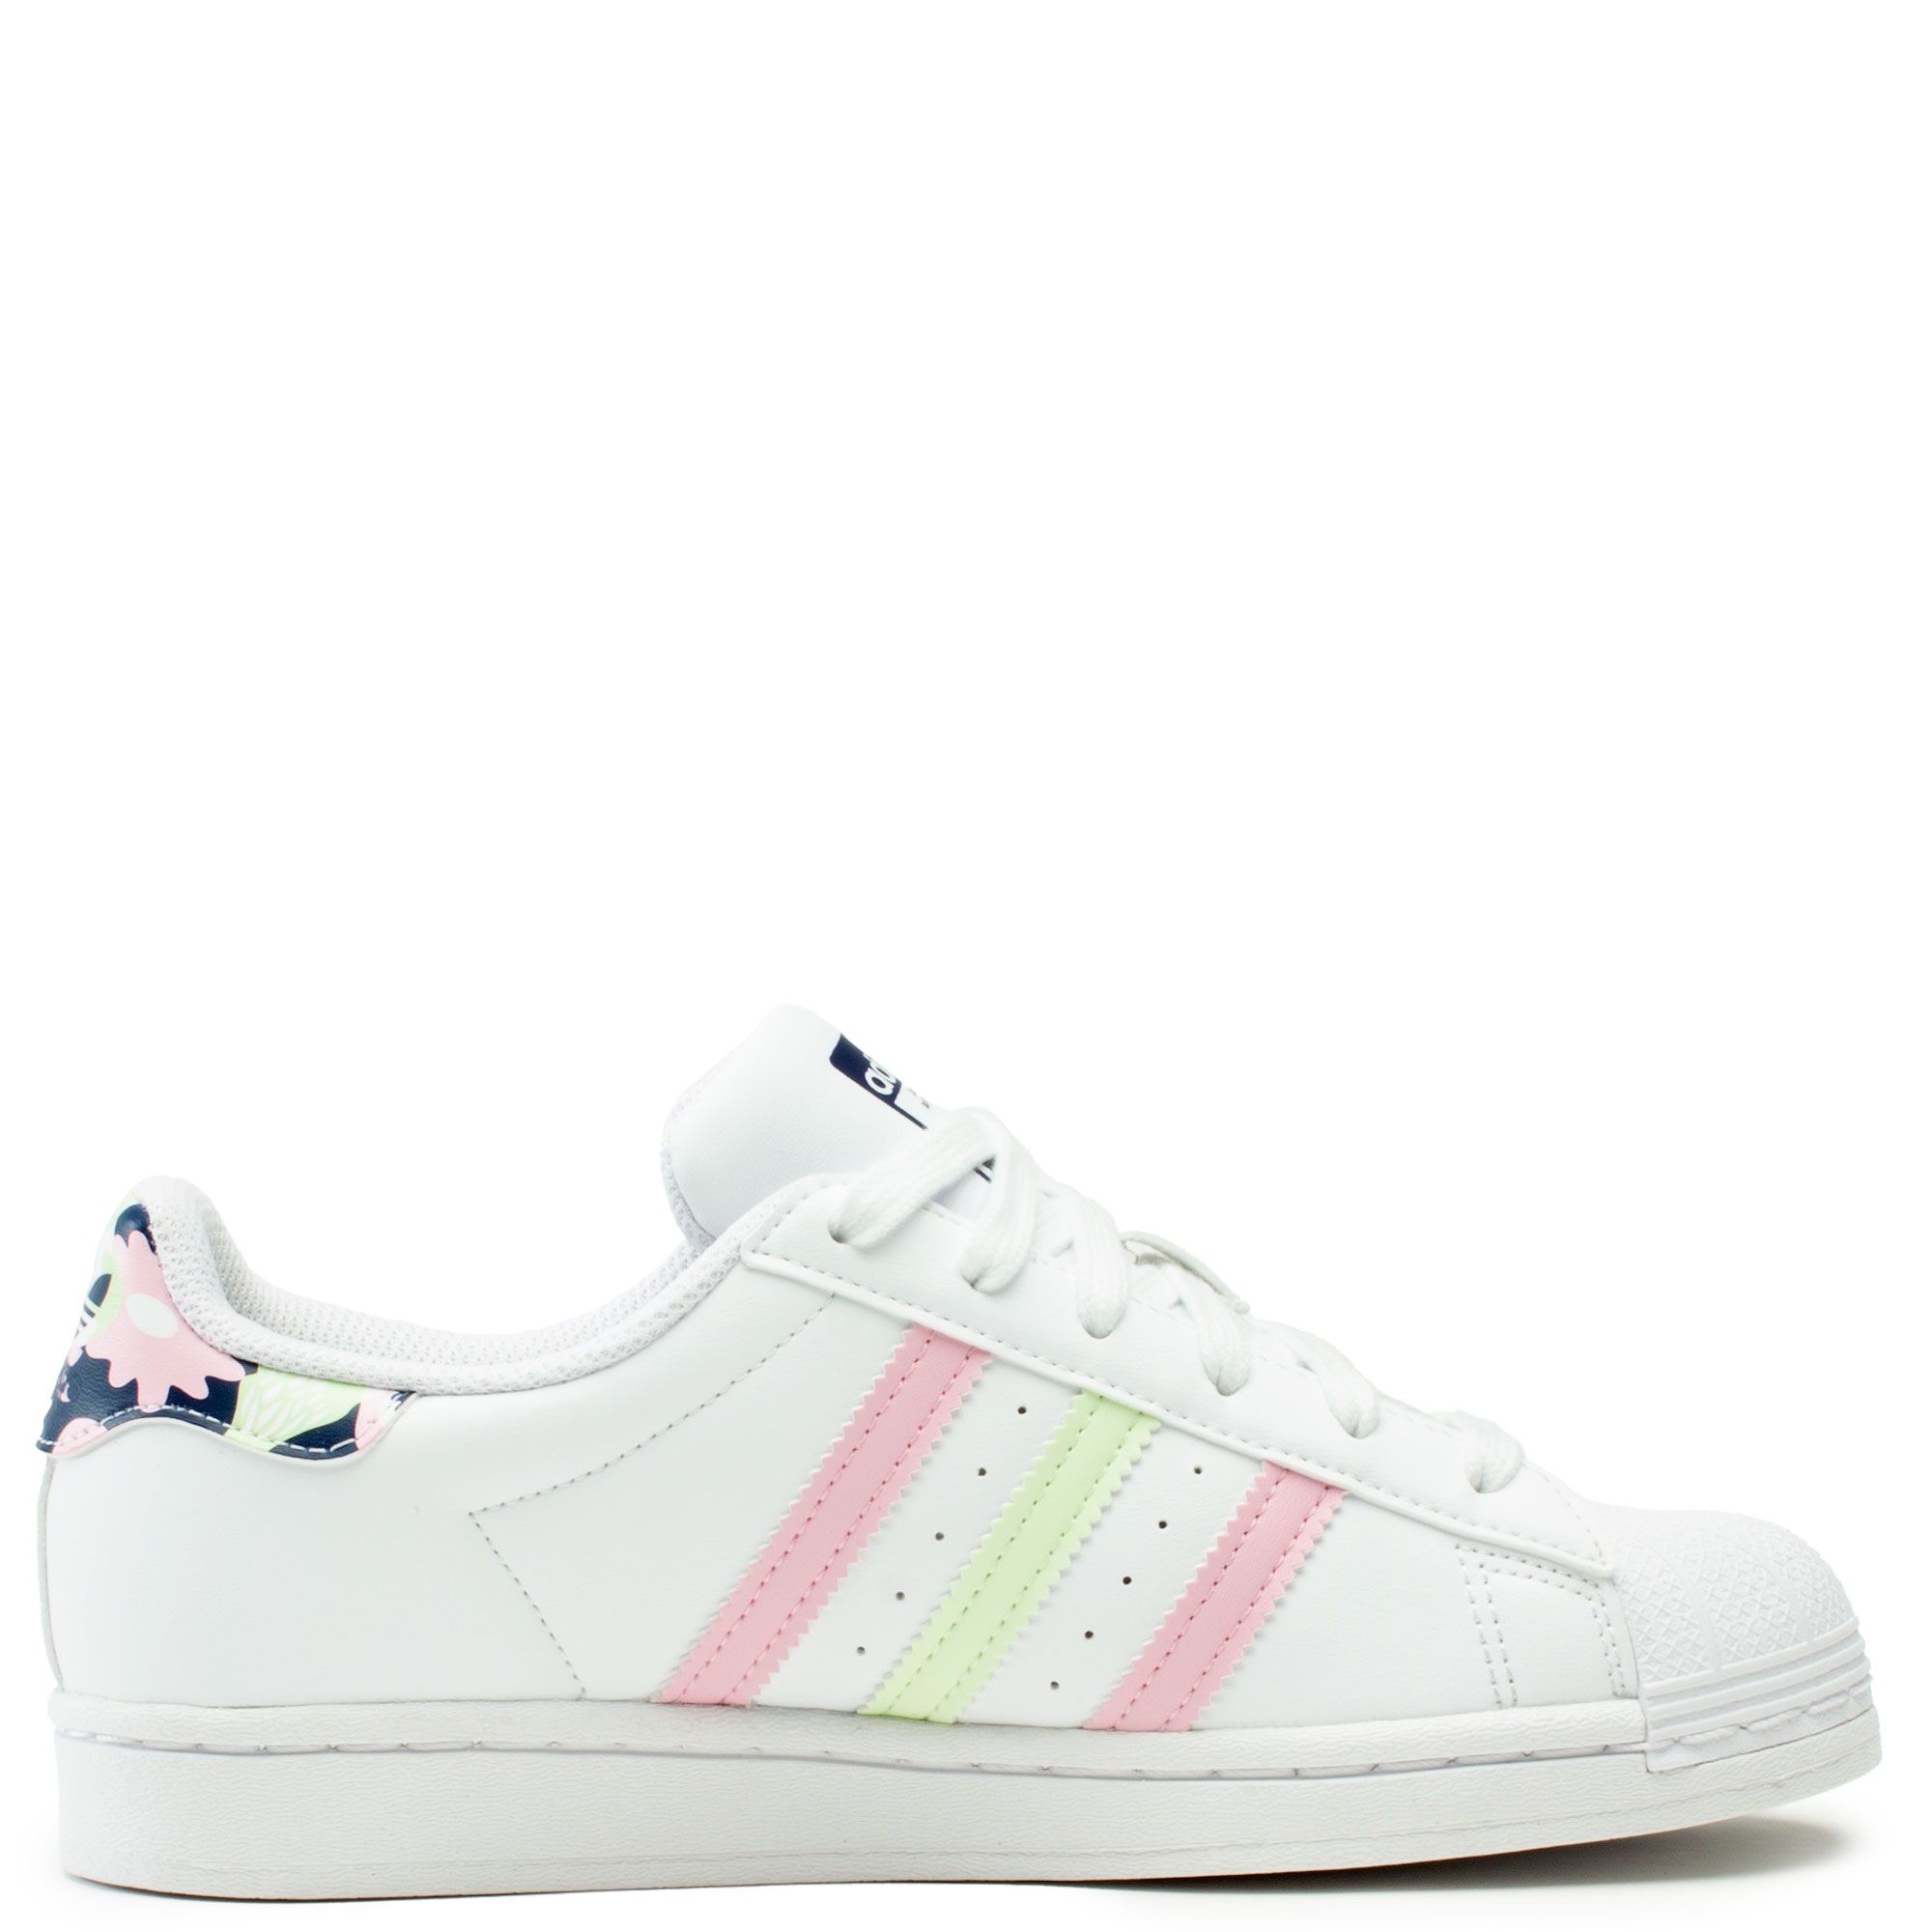 Afrikaanse Ronde Taille ADIDAS (GS) Superstar GY3330 - Shiekh